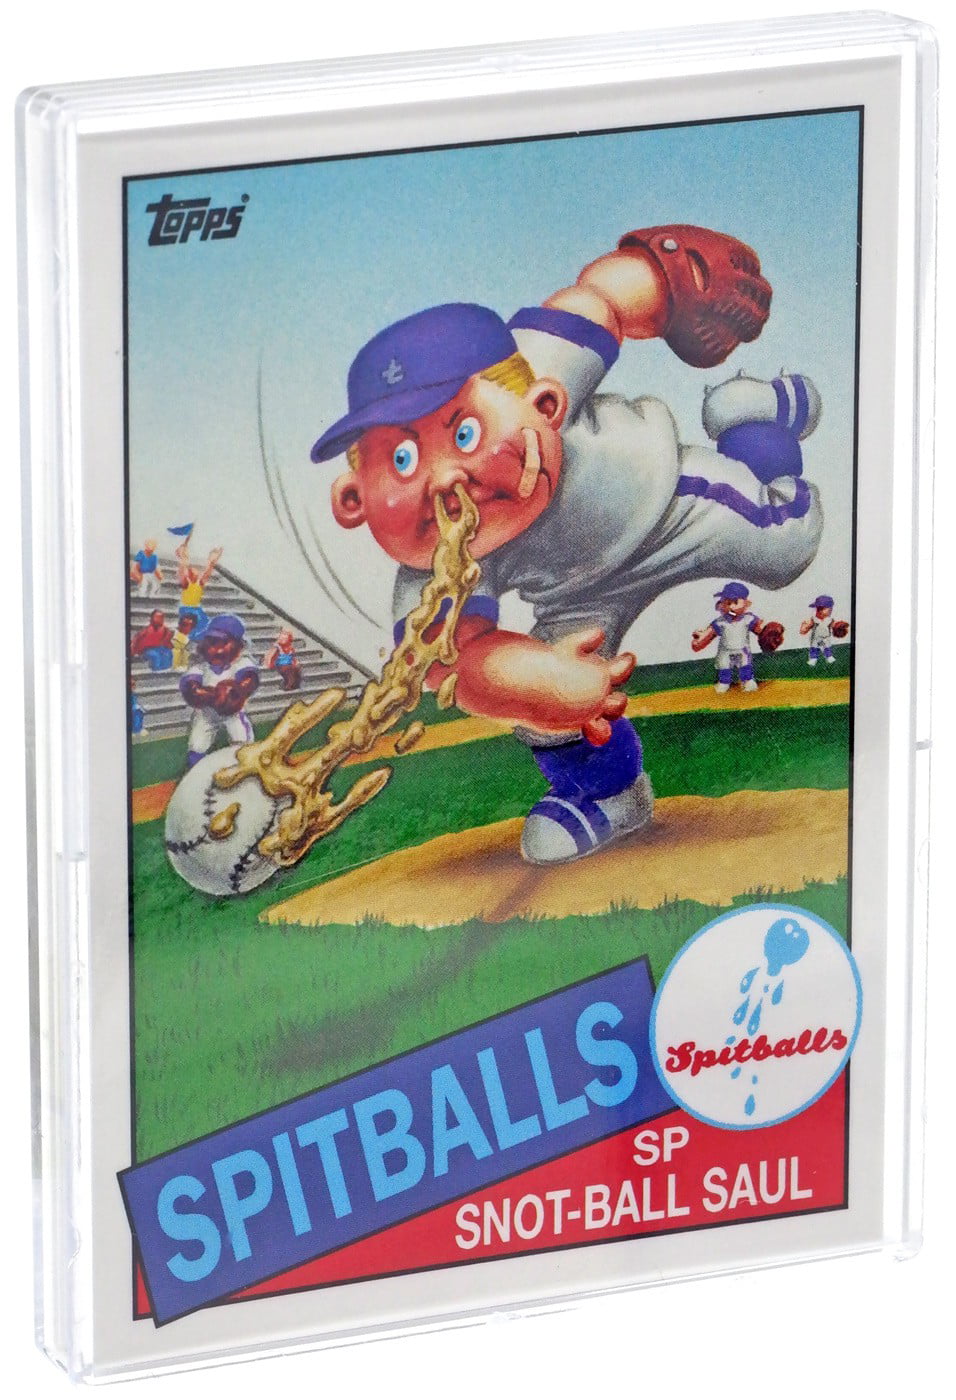 1985 GPK Garbage Pail Kids Series 2 Single Cards $2.79 EACH You Pick From List 